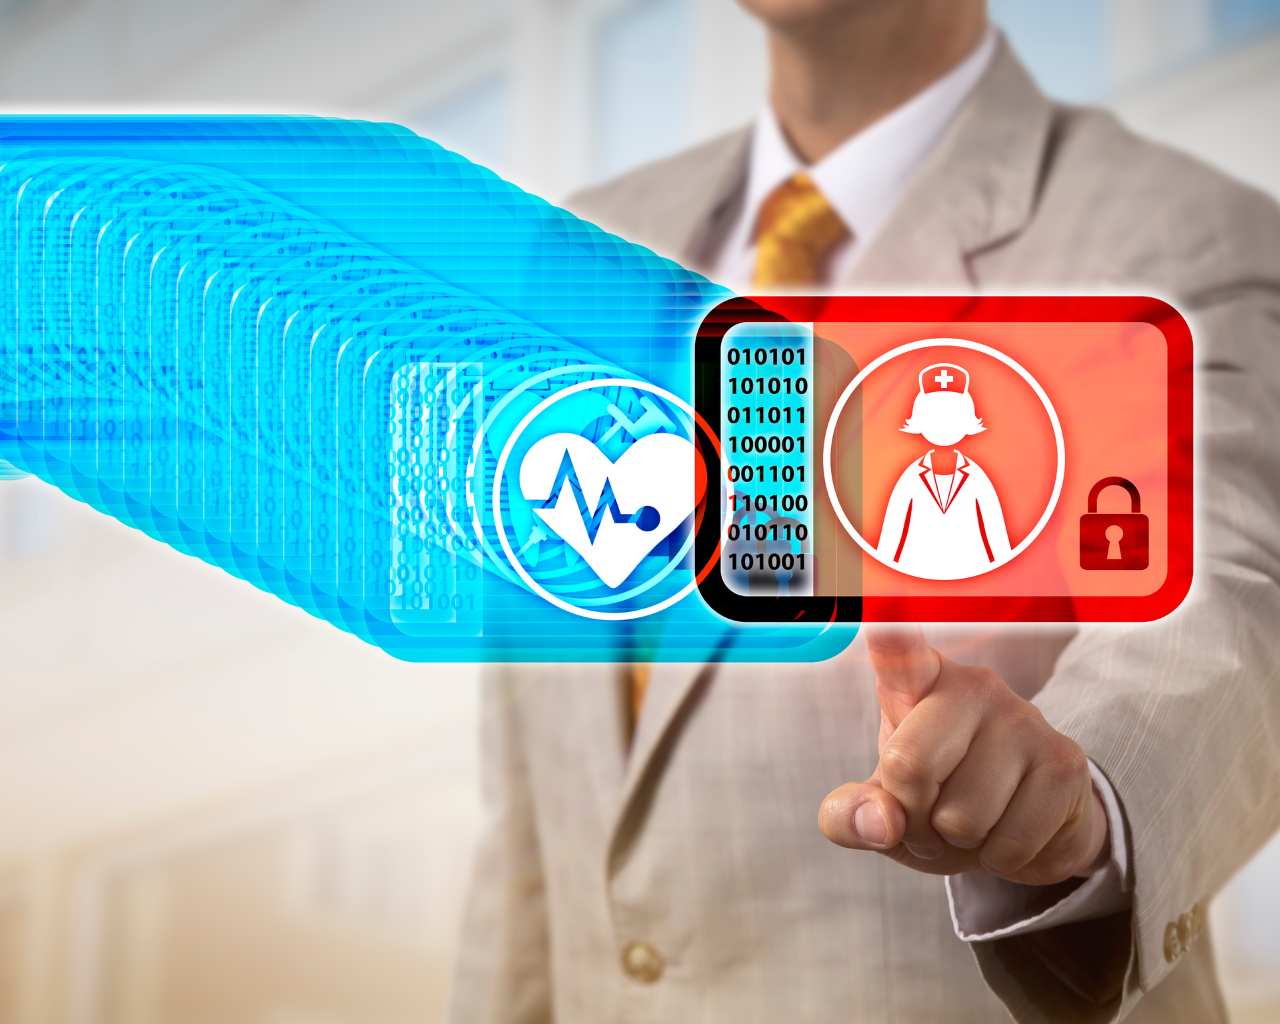 Cybersecurity for healthcare organizations